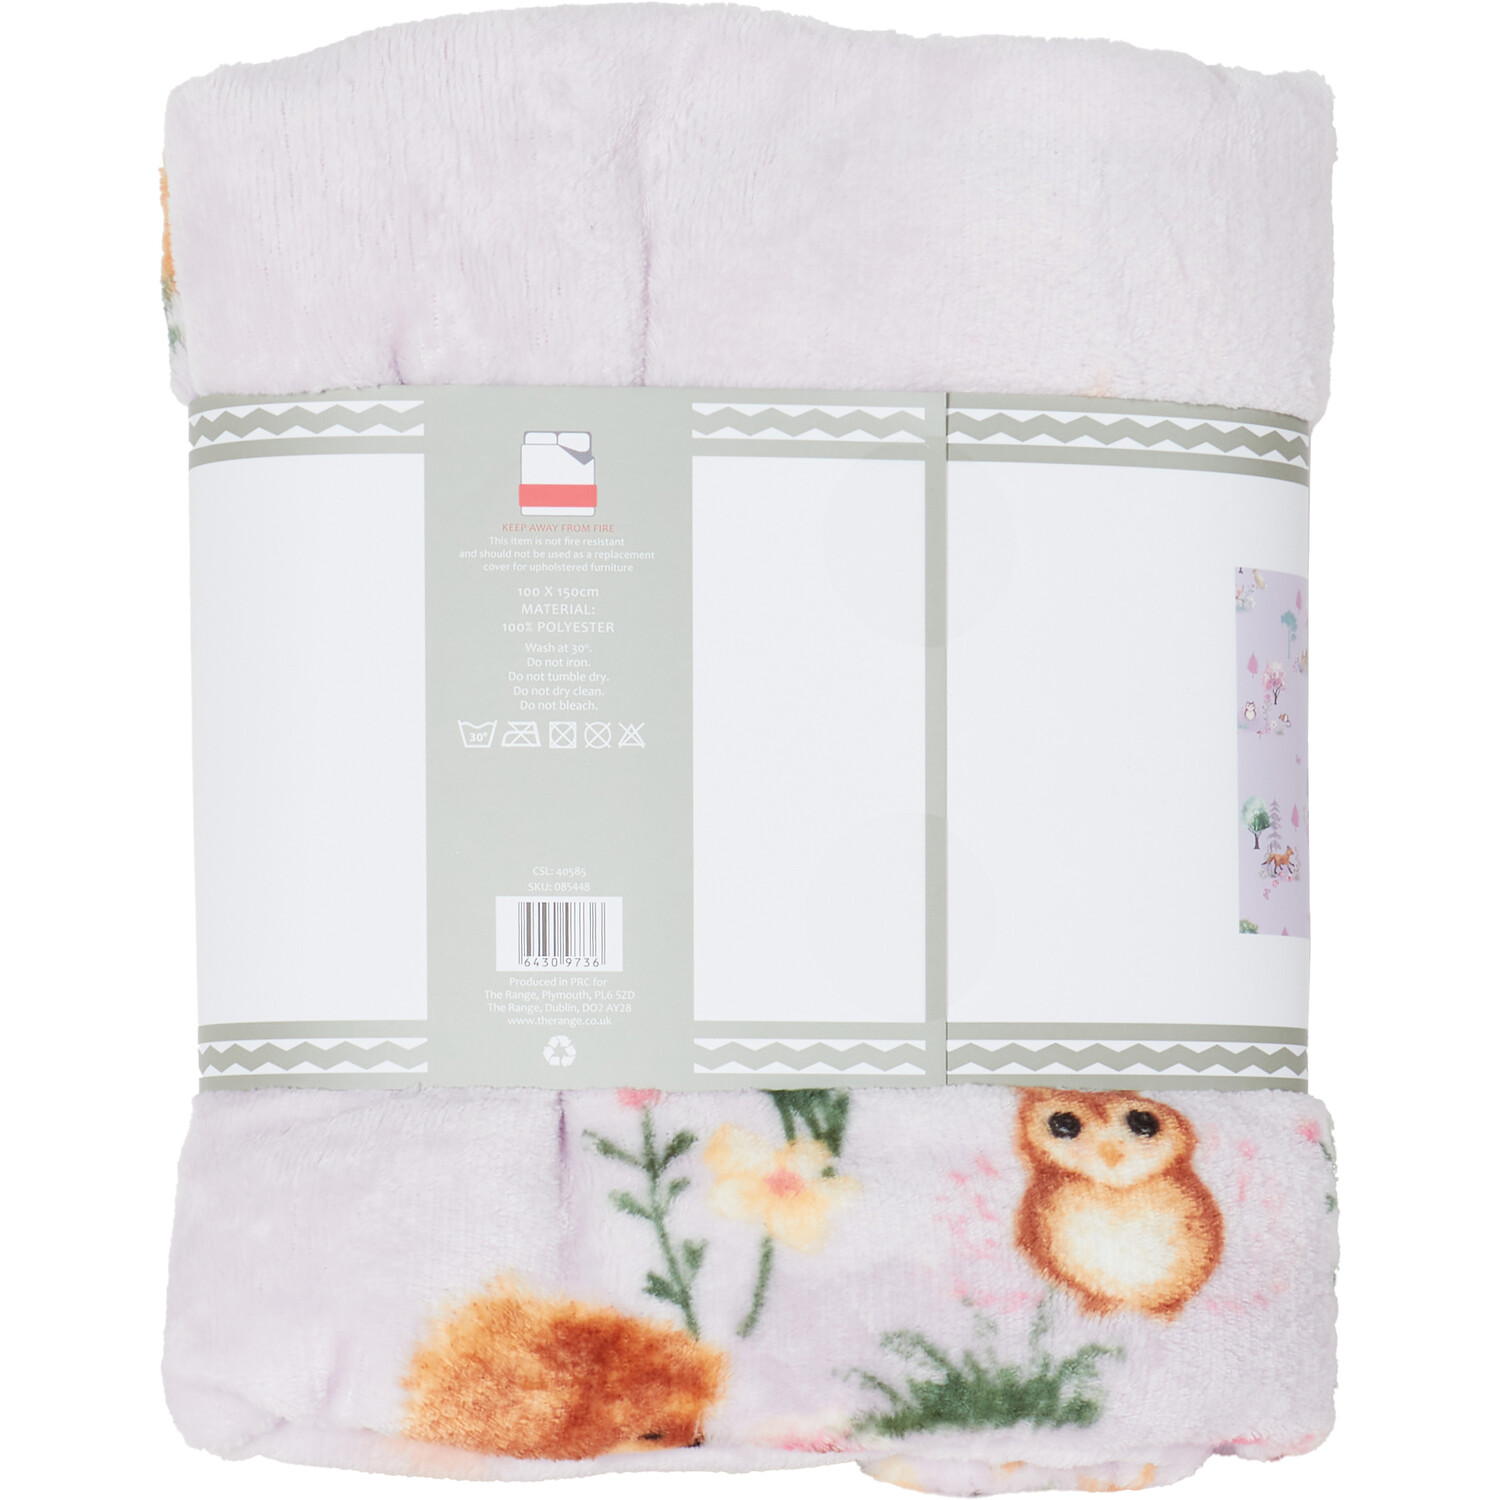 Enchanted Forest Throw - White Image 4